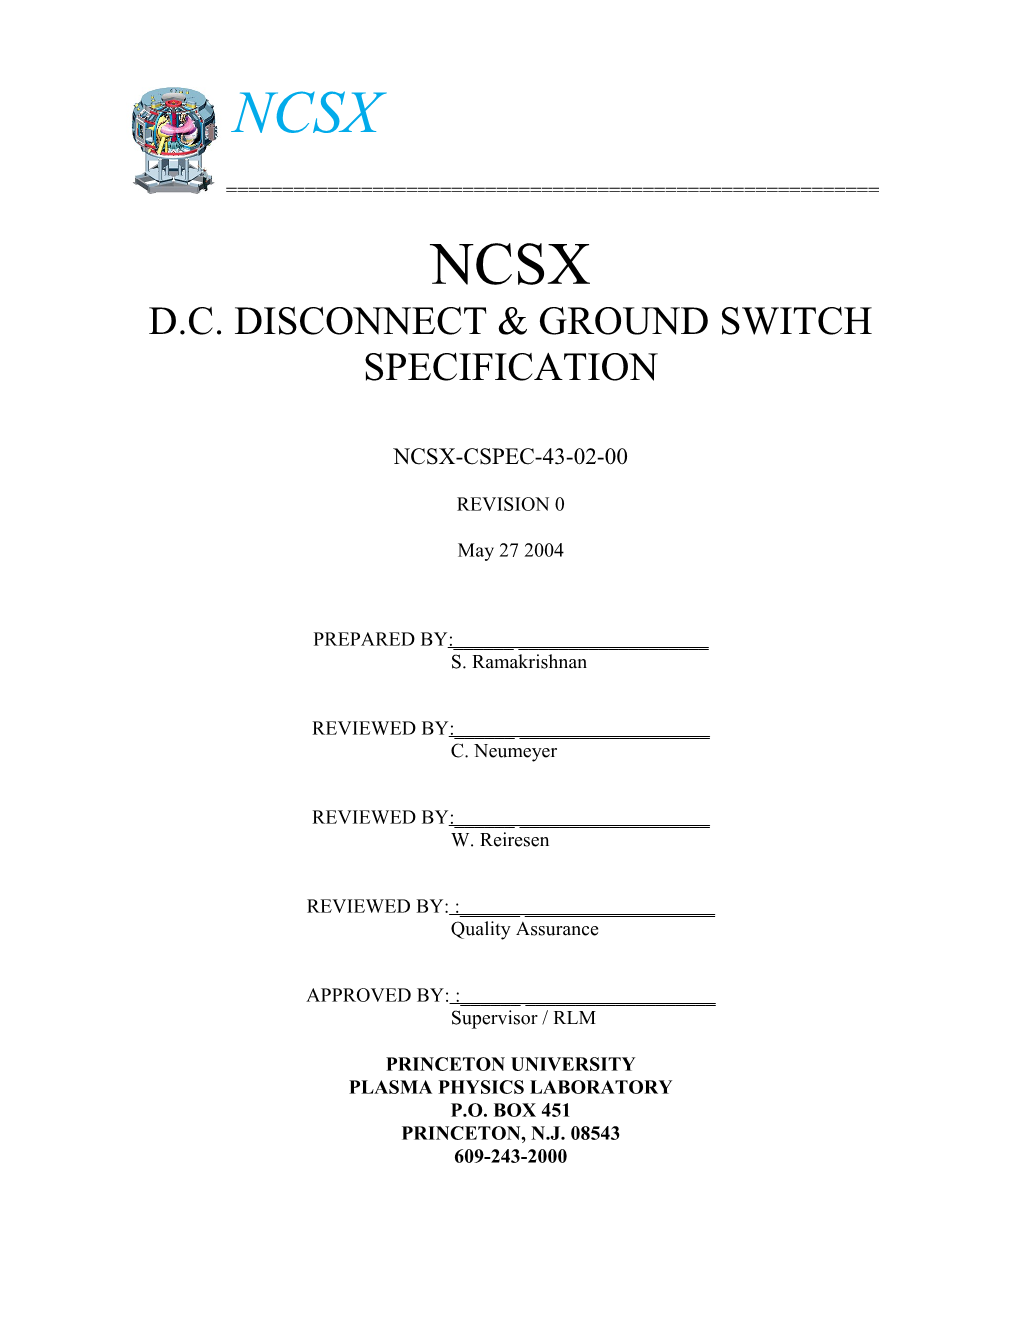 D.C. Disconnect & Ground Switch Specification